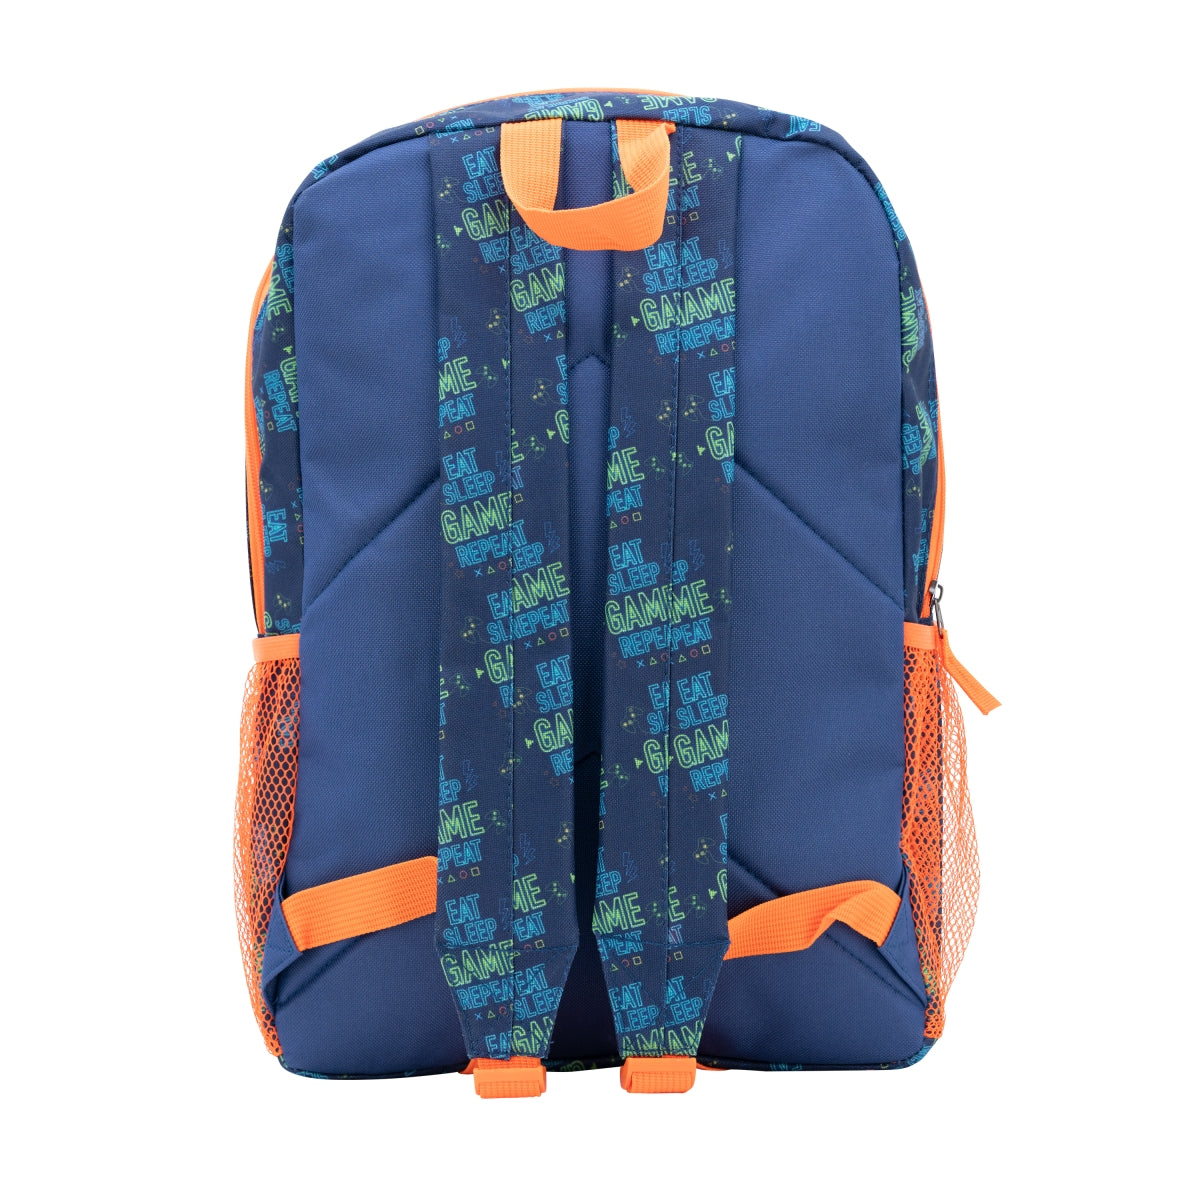 Quest Game Repeat 4 Piece Backpack Combo – Navy